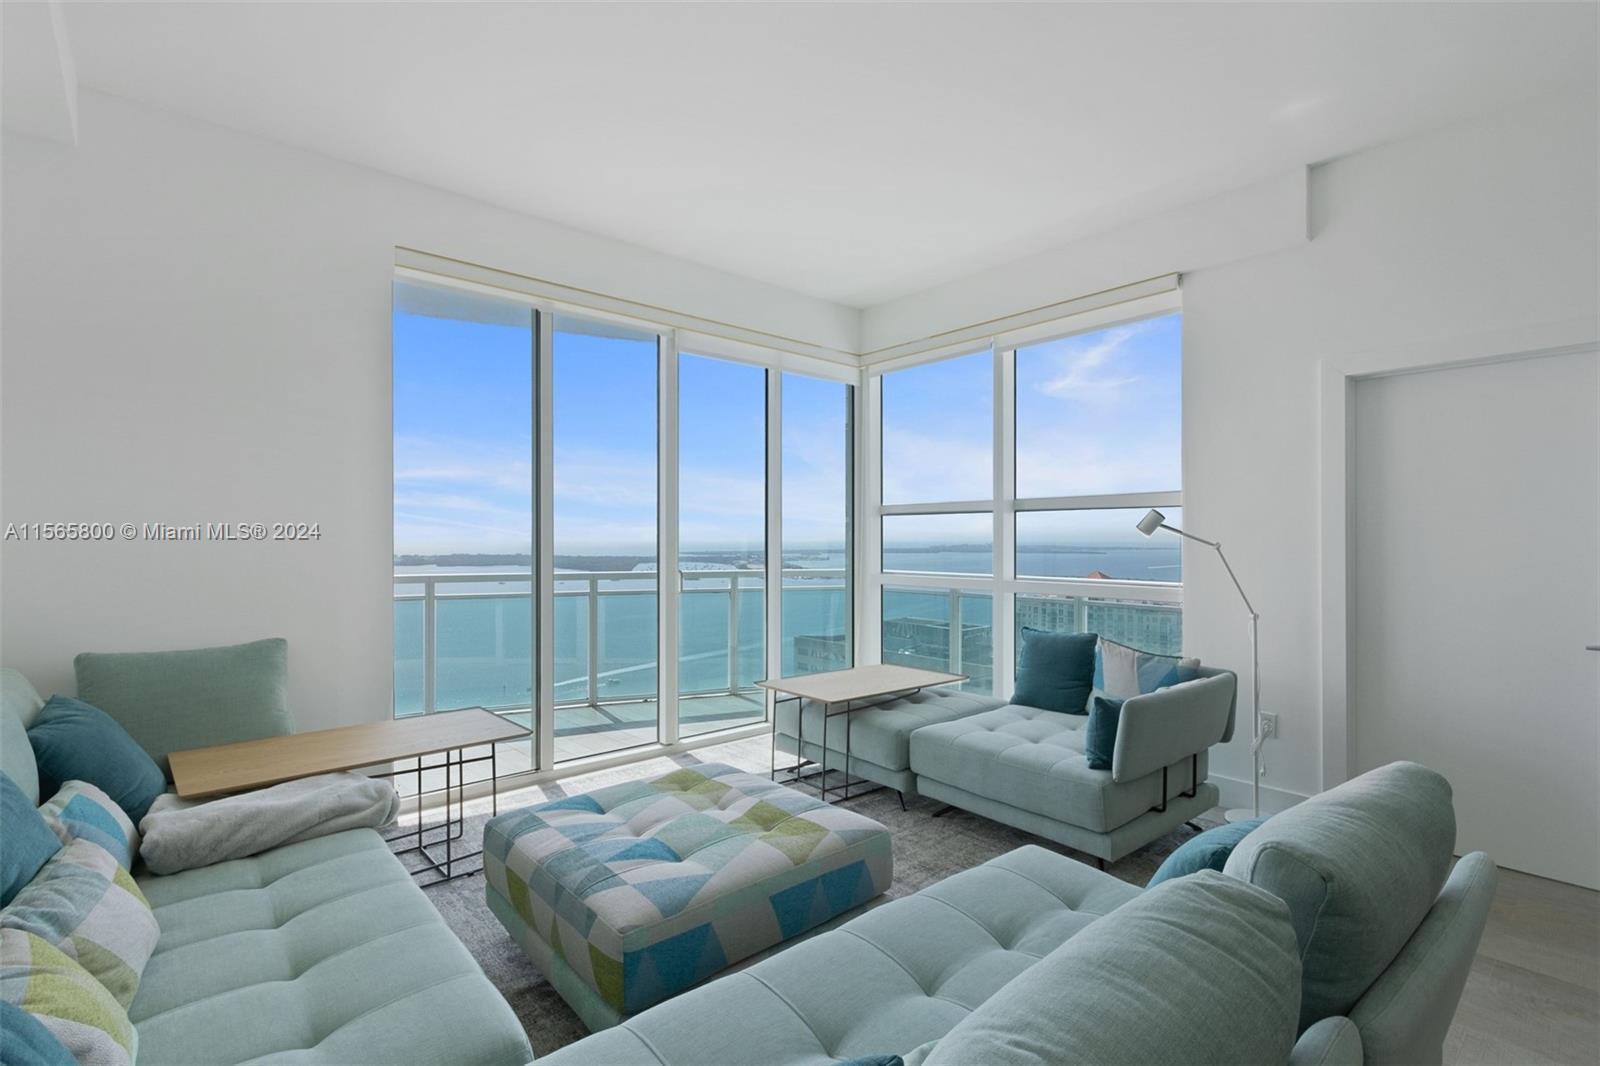 Immerse yourself in this luxurious 2 bedroom 2.5 bath apartment in the esteemed “10” line at The Plaza On Brickell. Bask in your completely unobstructed views of Biscayne Bay from your expansive balcony. Enjoy the natural light streaming through floor-to-ceiling windows accentuates the meticulous upgrades throughout, including sleek wood tile flooring, updated bathroom finishes, upgraded lighting systems, and more. Furnished with brand new European furniture, the apartment awaits your personal artistic touch to complete its elegance. Unit comes with one parking space. Live at the luxurious Plaza on Brickell condominium whose resort style amenities included 24 hour concierge and valet, state of the art gym, 2 large swimming pools, jacuzzi, business center and more.